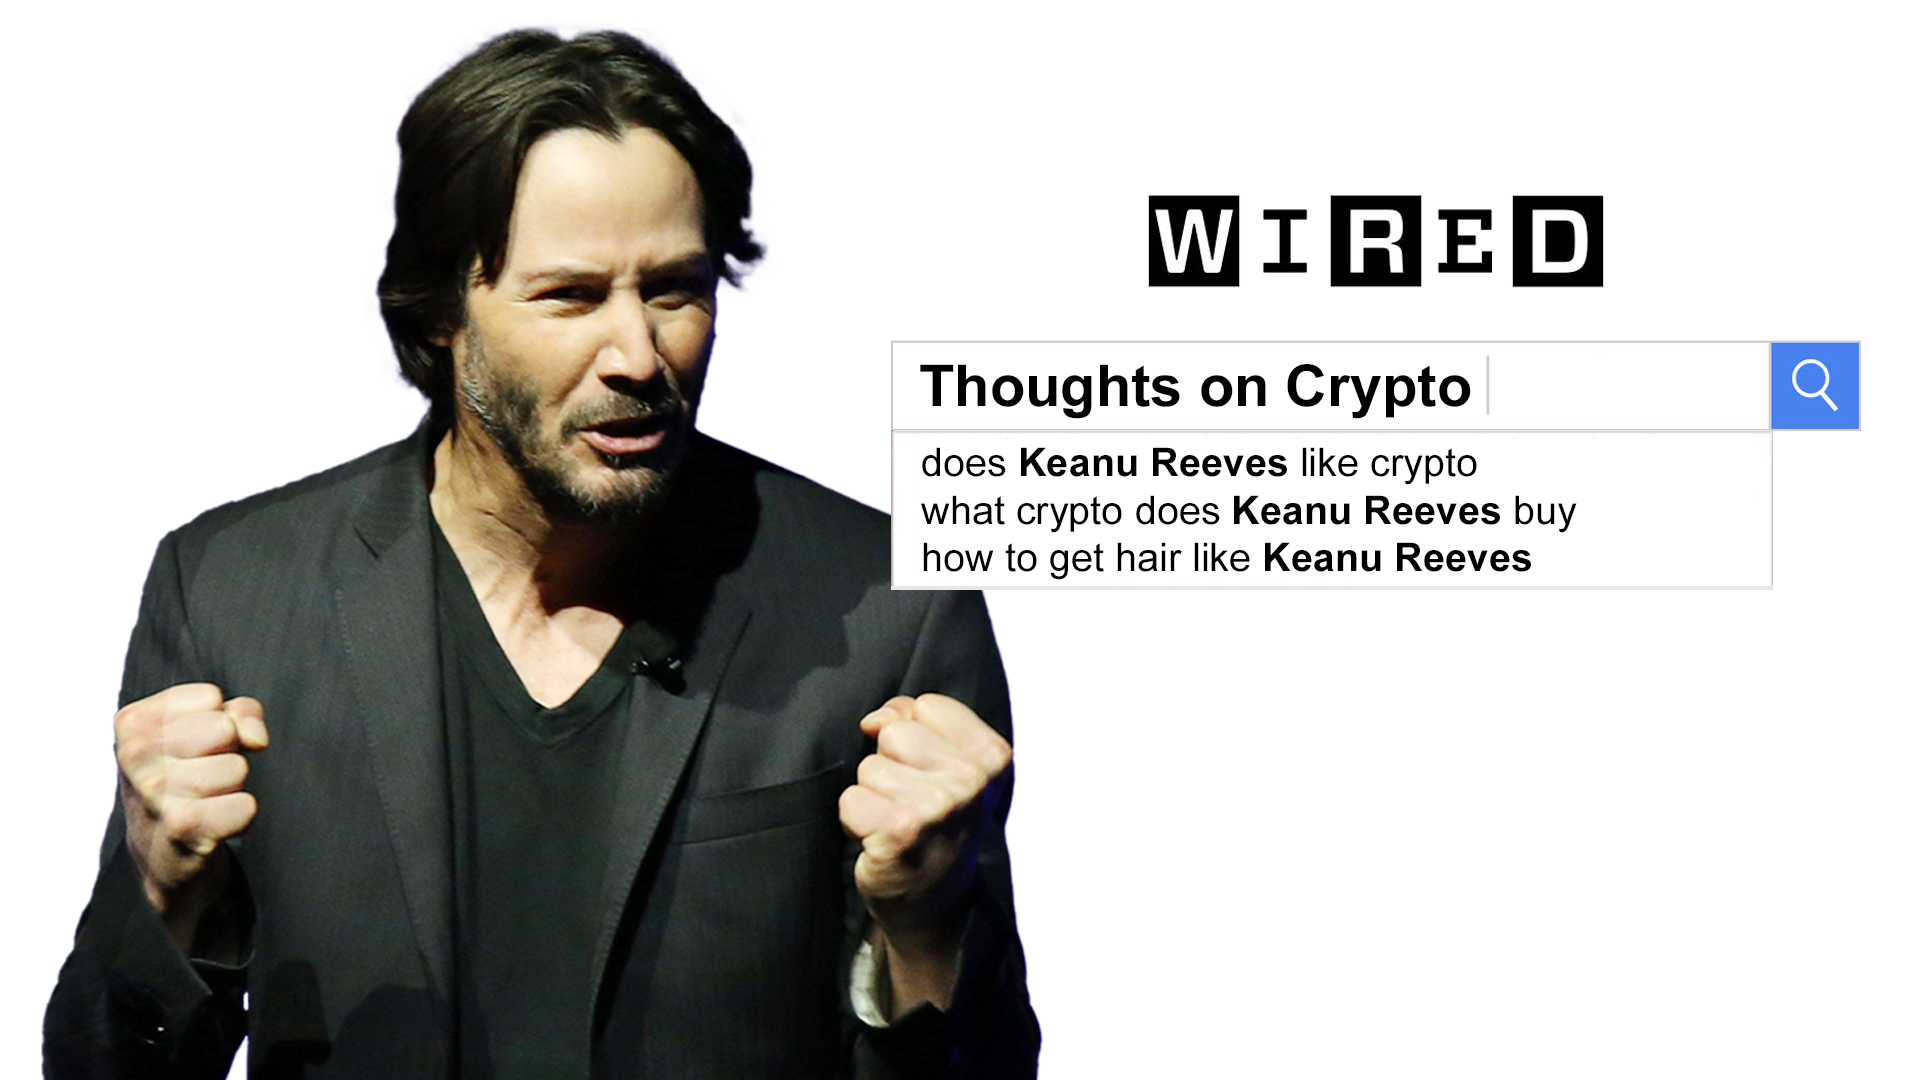 Reeves sat down with Wired magazine to discuss the crypto industry. 